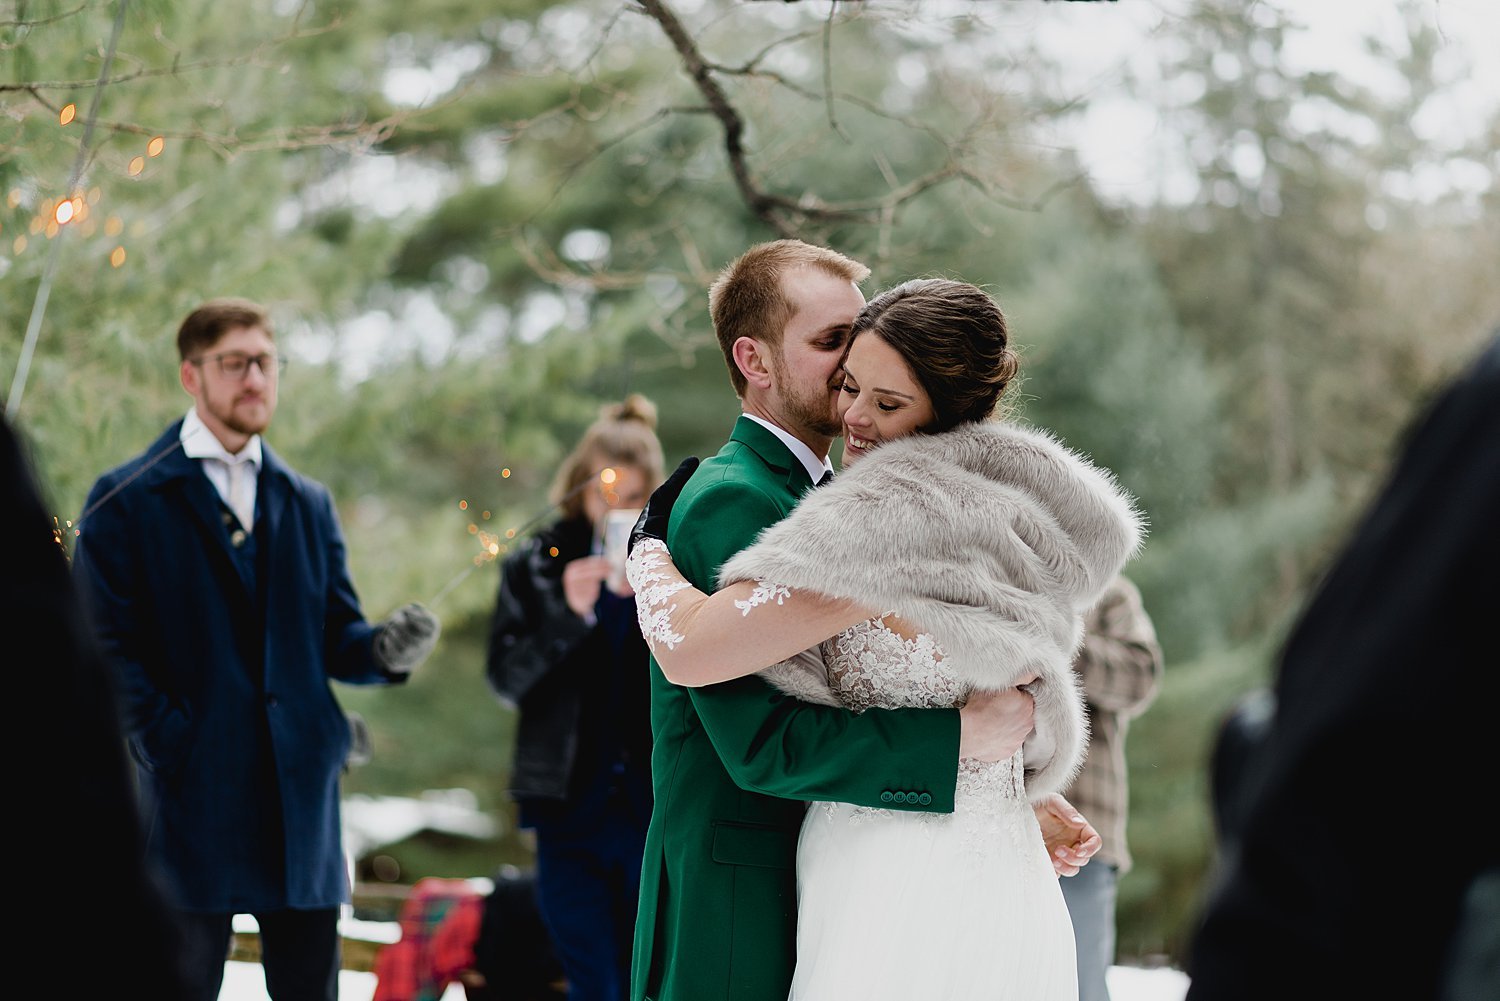 Intimate Winter Elopement at O'Hara Mill Homestead in Madoc, Ontario | Prince Edward County Wedding Photographer | Holly McMurter Photographs_0032.jpg